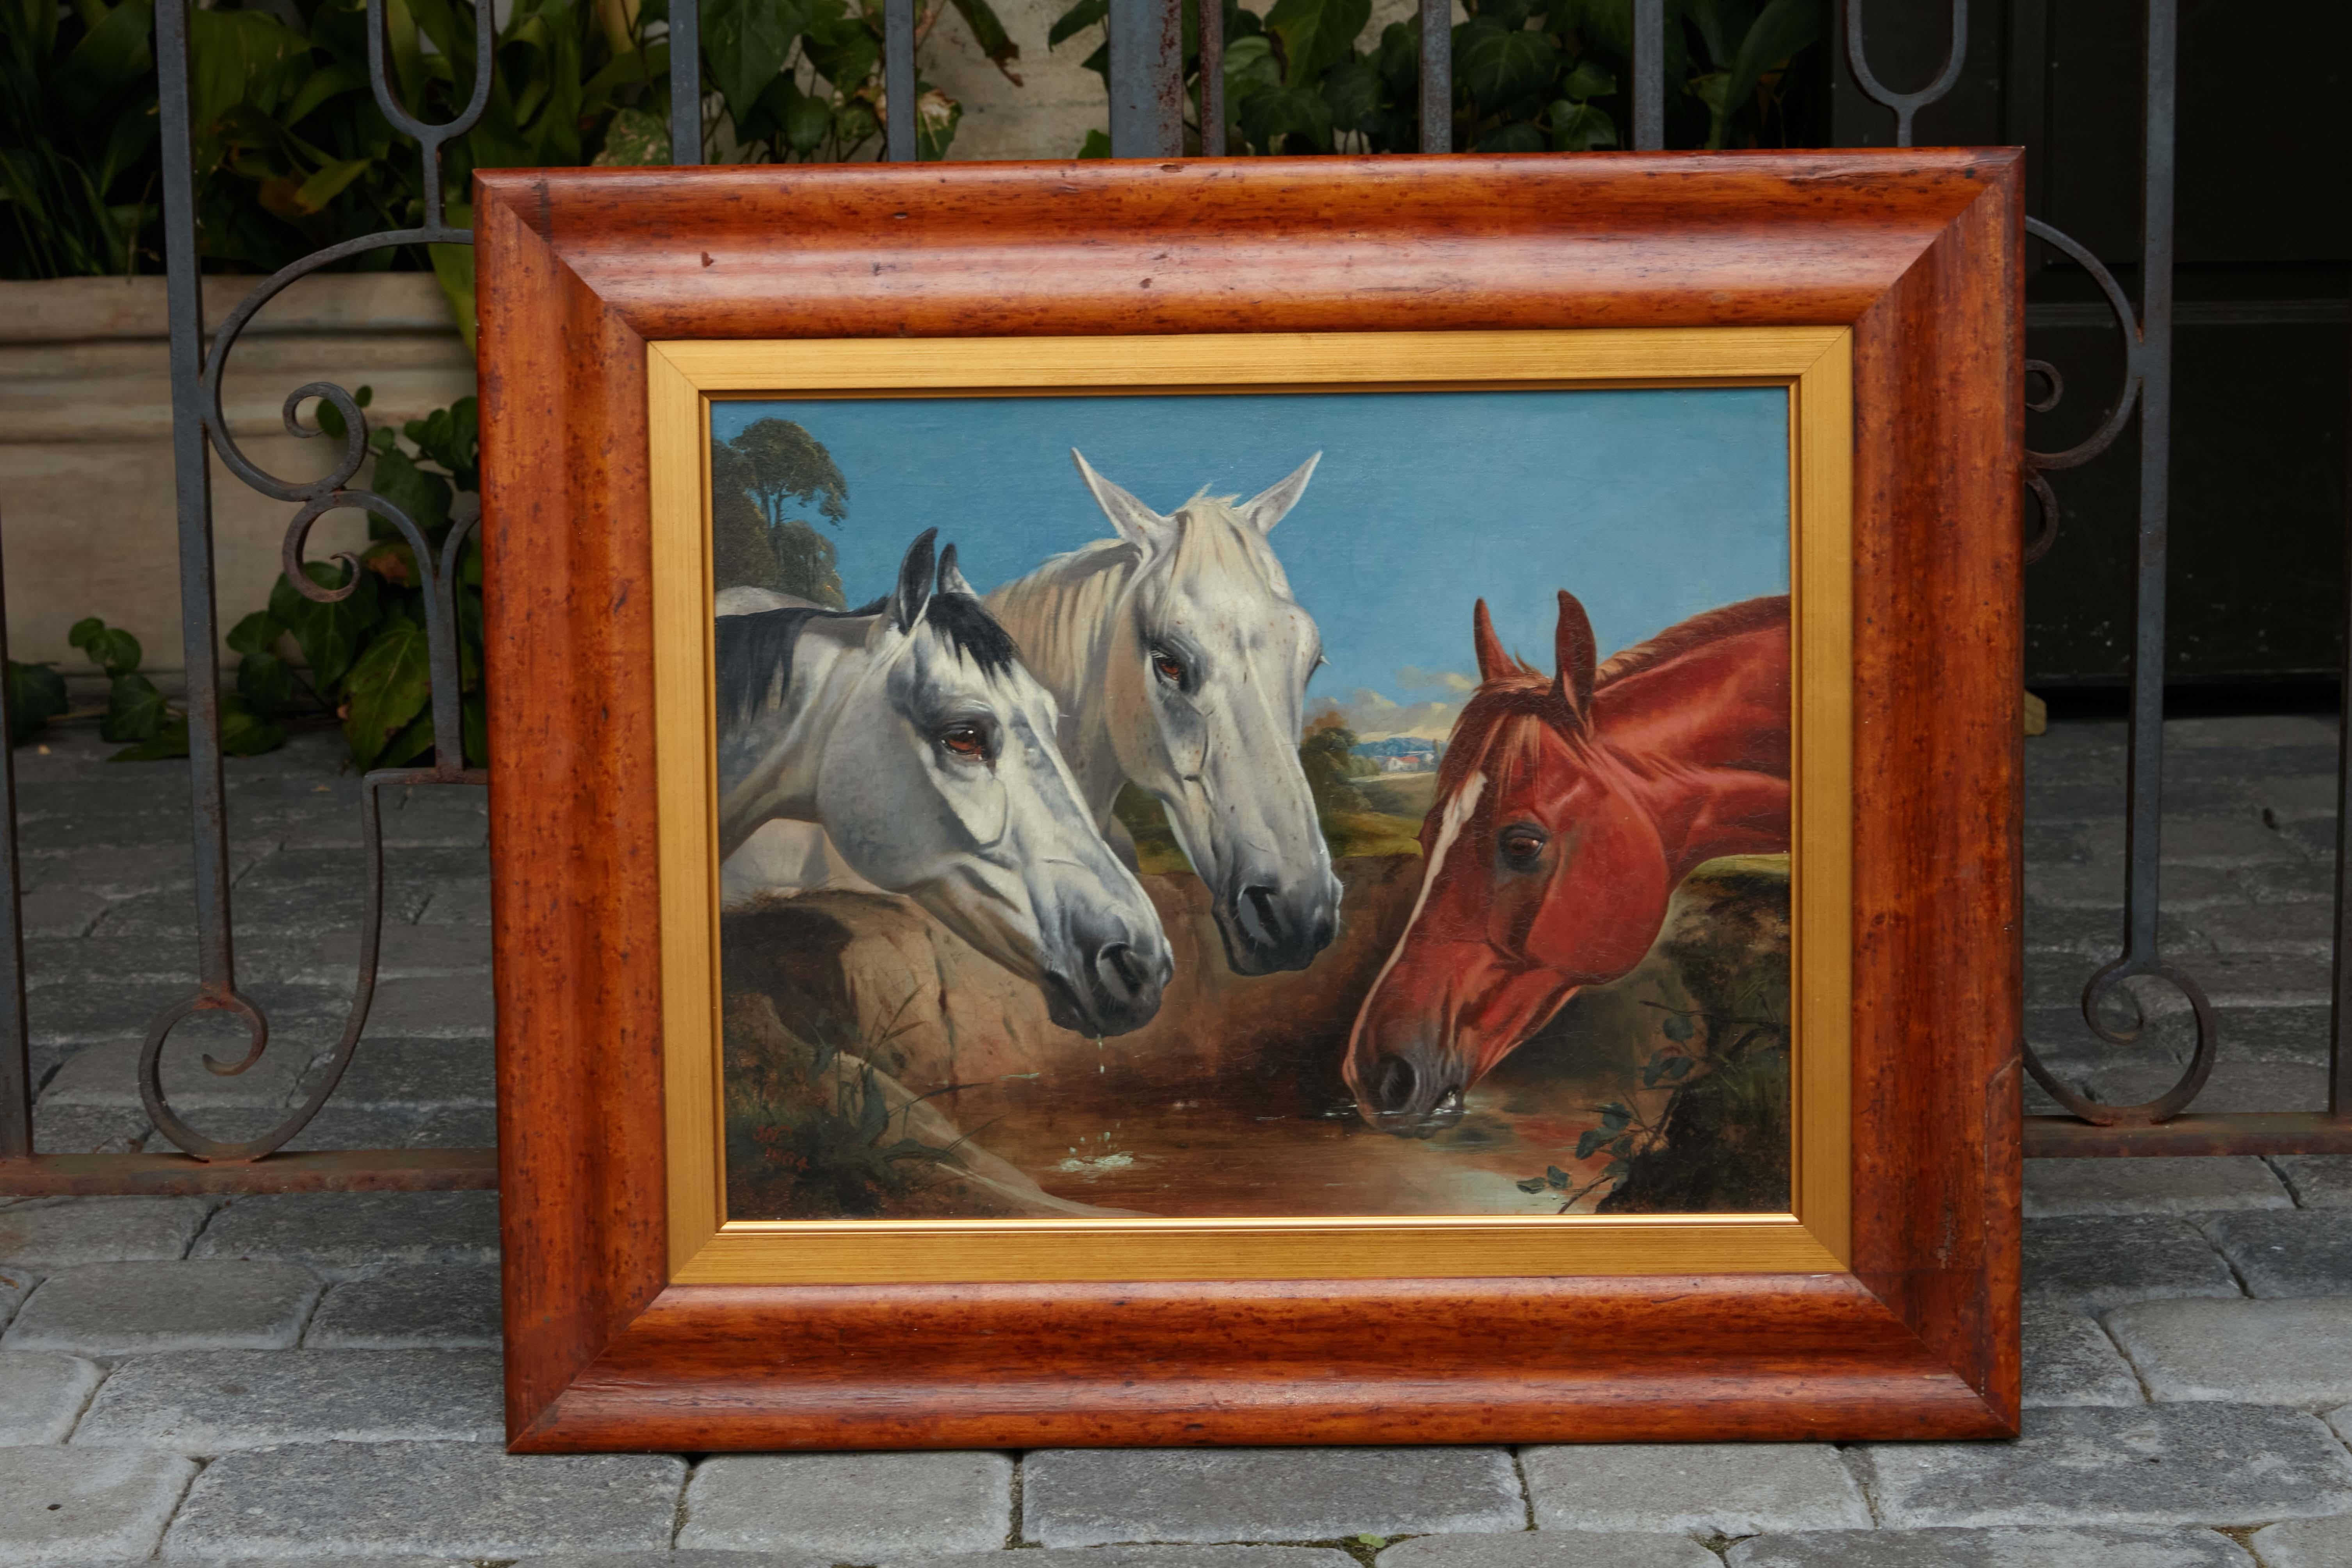 An English oil on board equestrian painting from the 19th century by John Alfred Wheeler (1821-1903) titled 